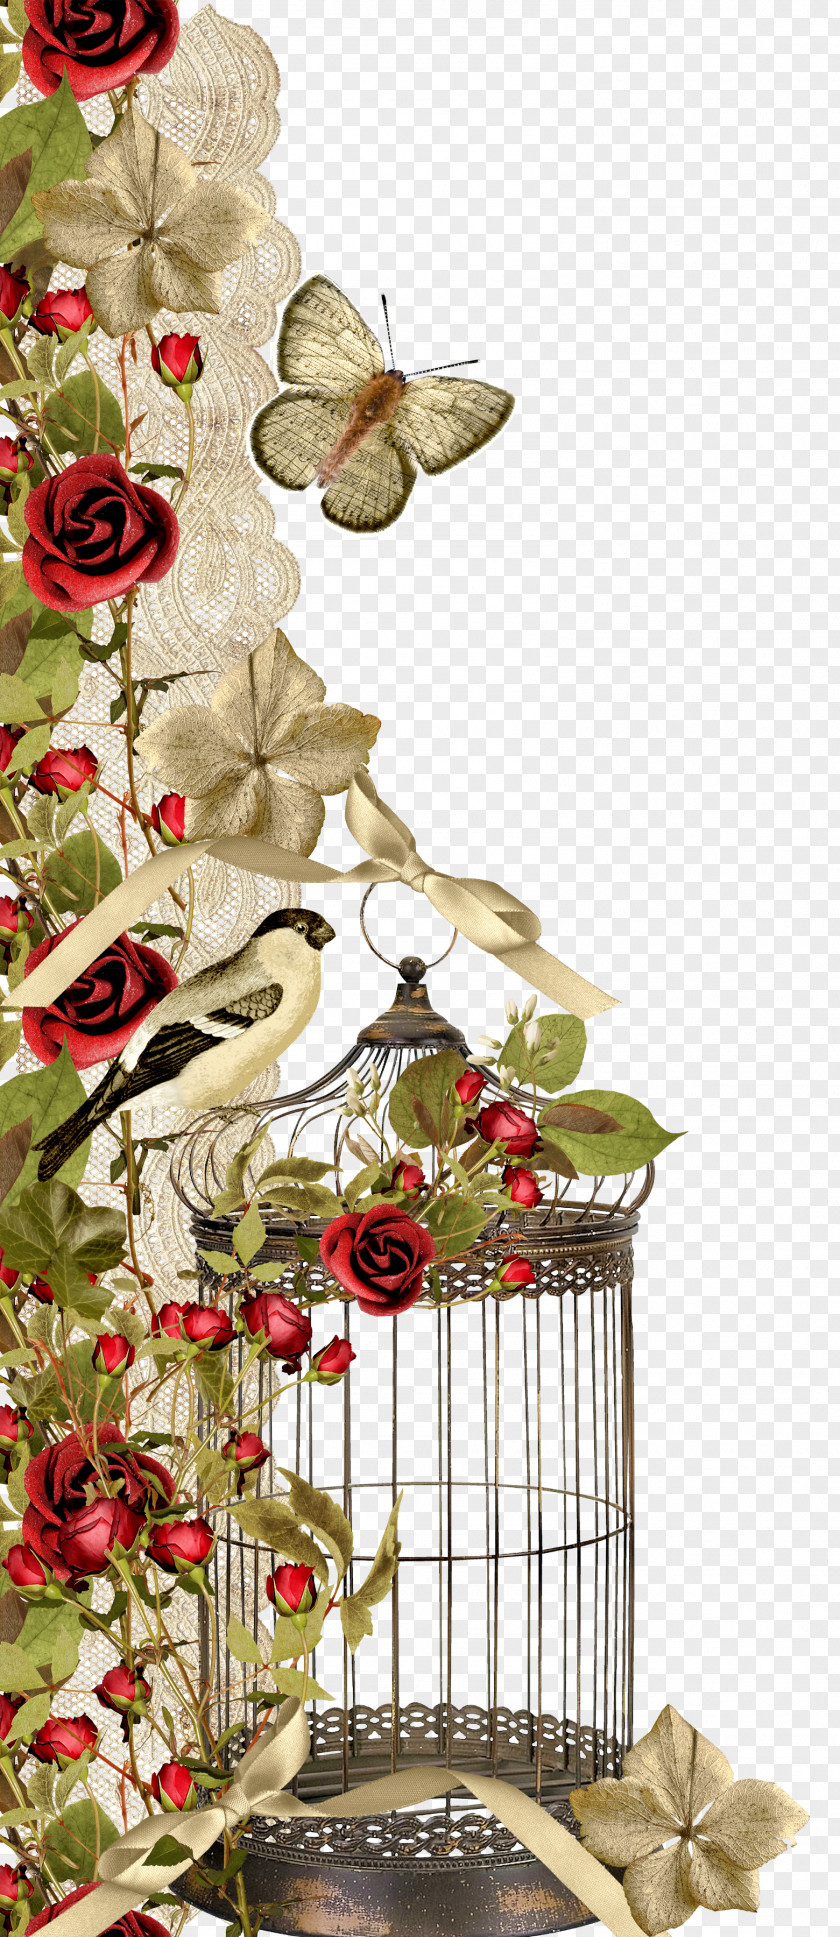 Synthesis Of Roses Digital Image Clip Art PNG